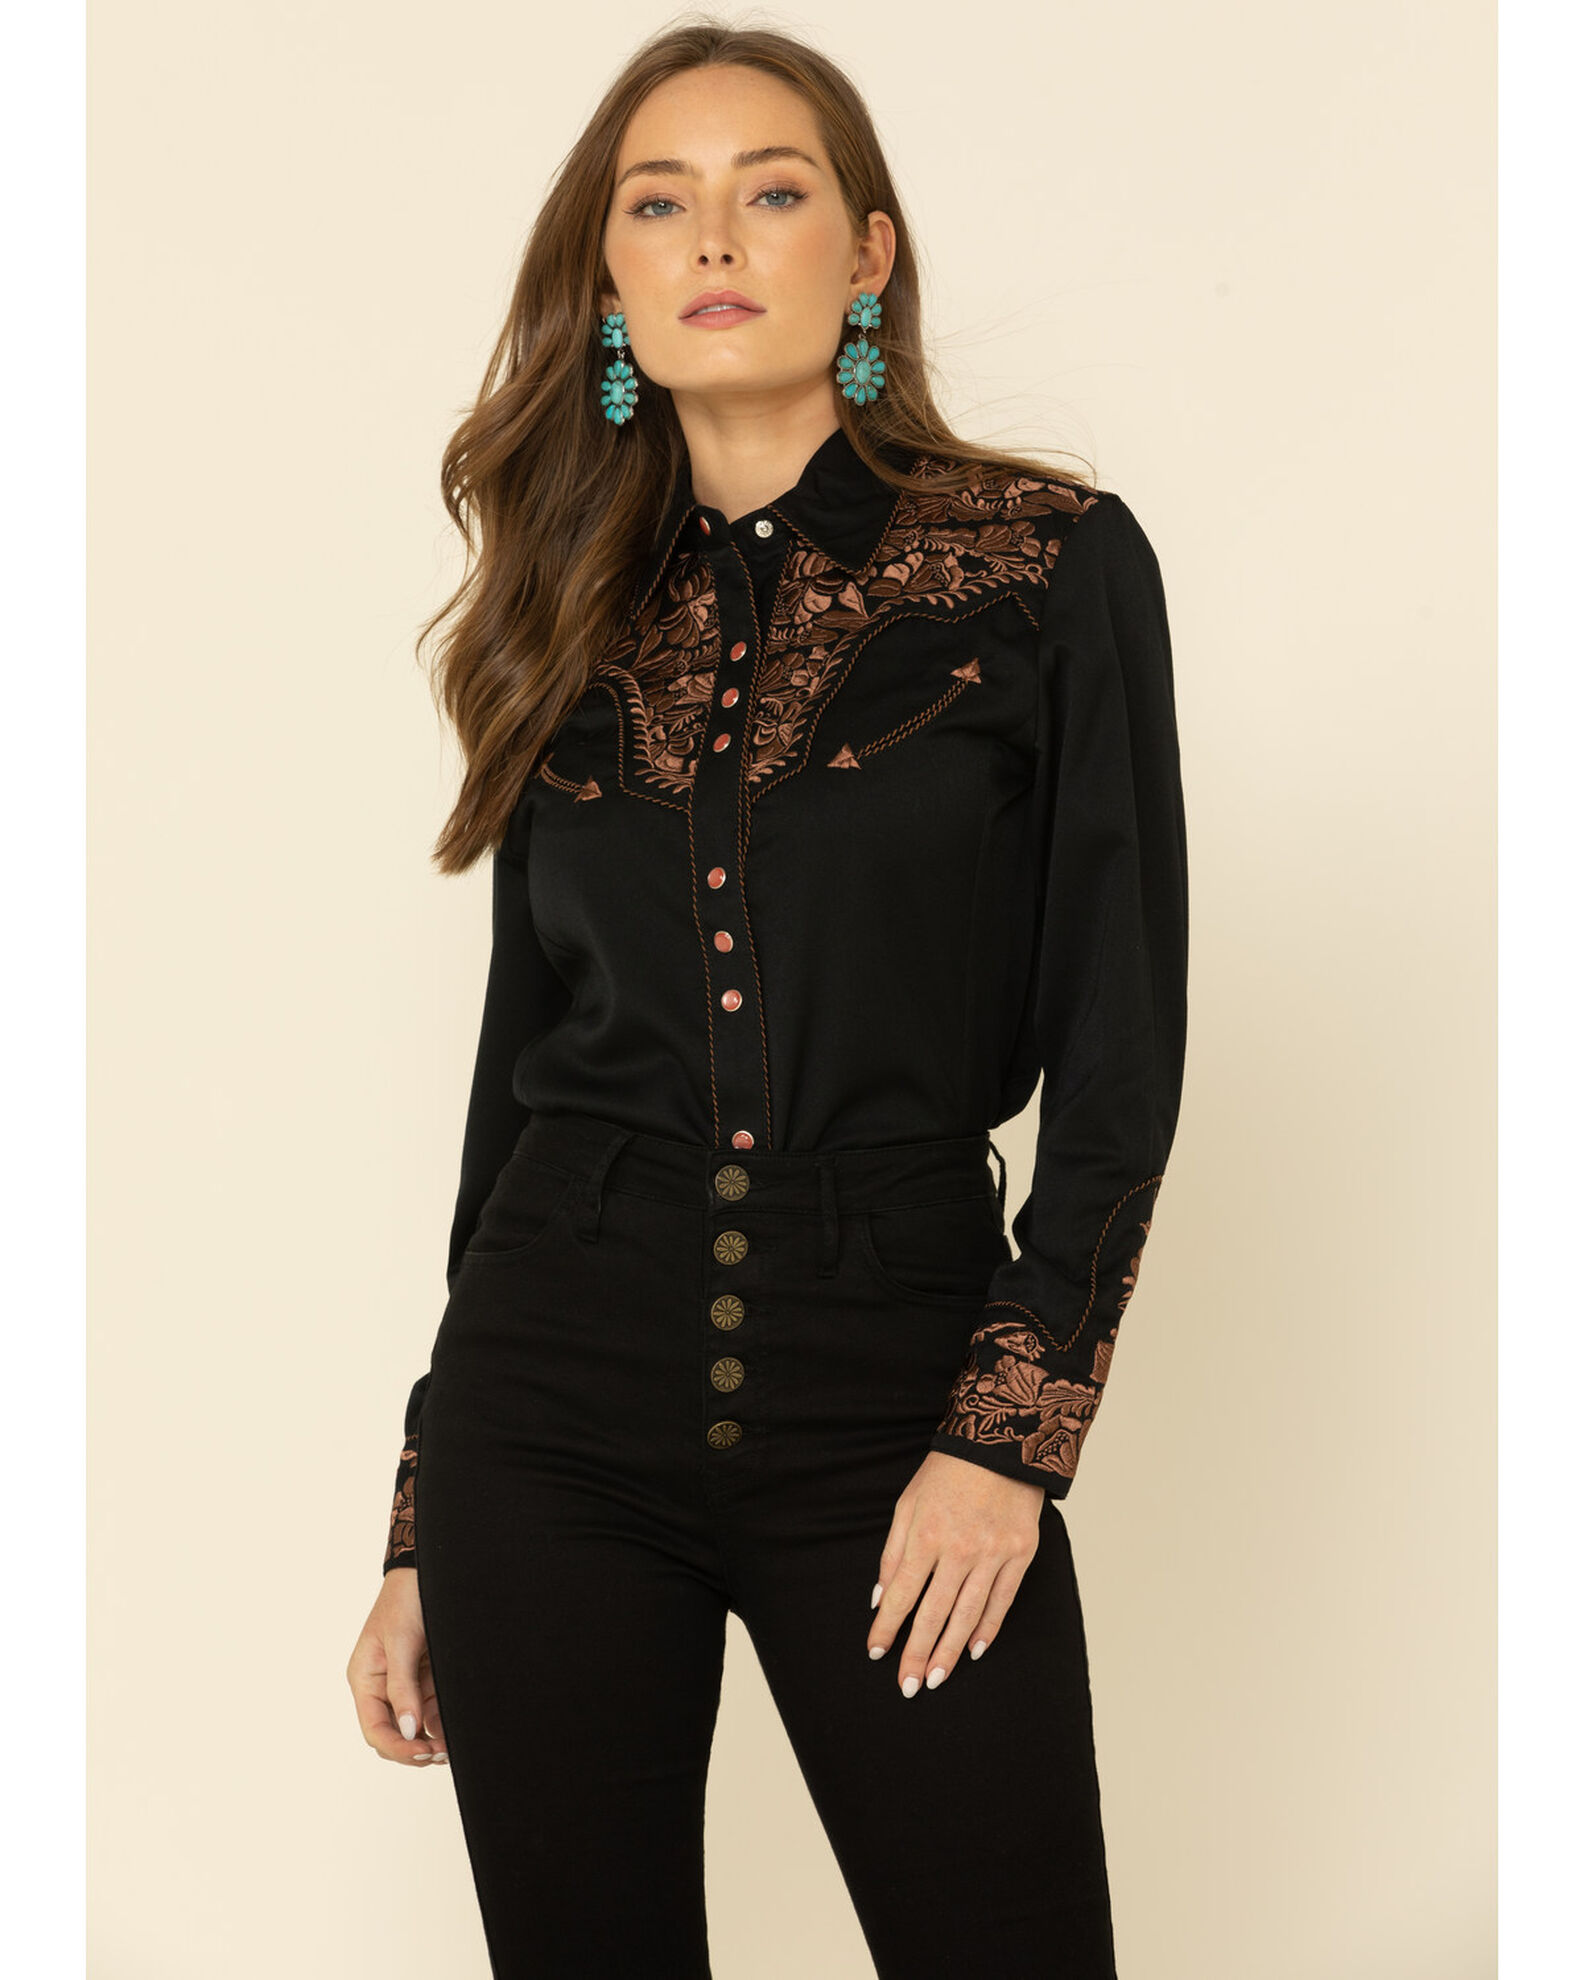 Product Name: Scully Women's Floral Embroidered Long Sleeve Western Shirt